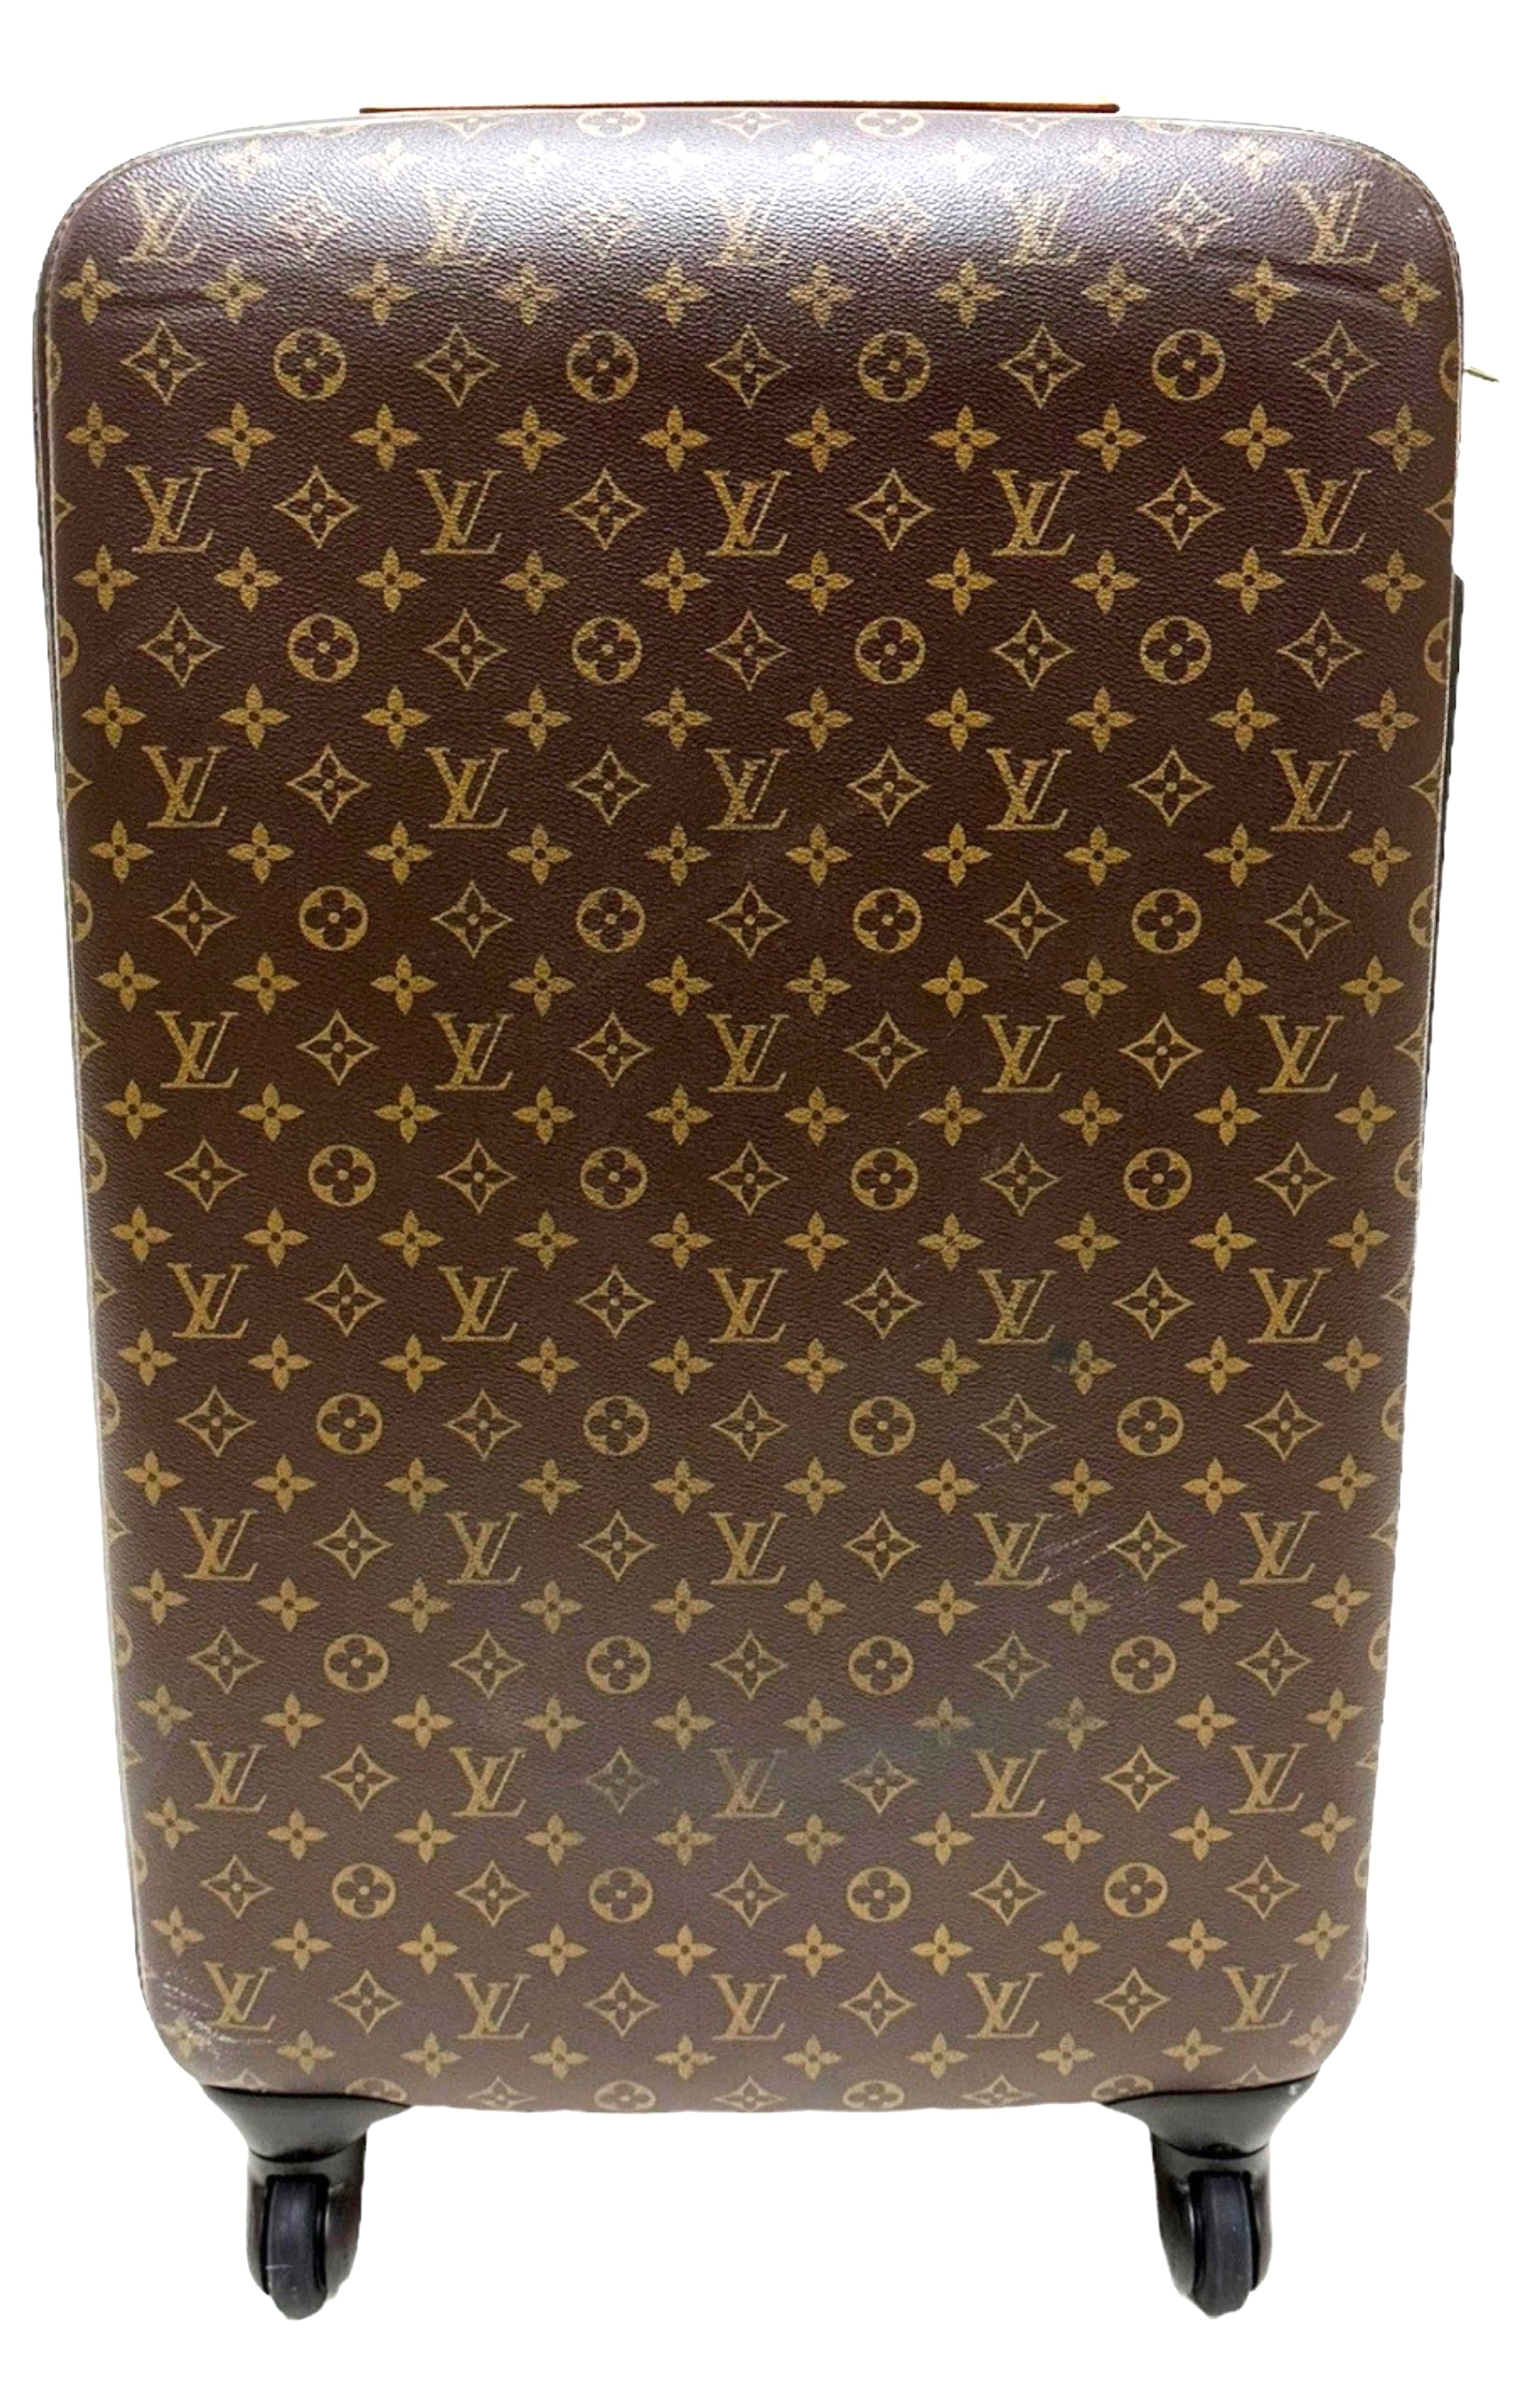 Louis Vuitton Carry On Travel Luggage for sale